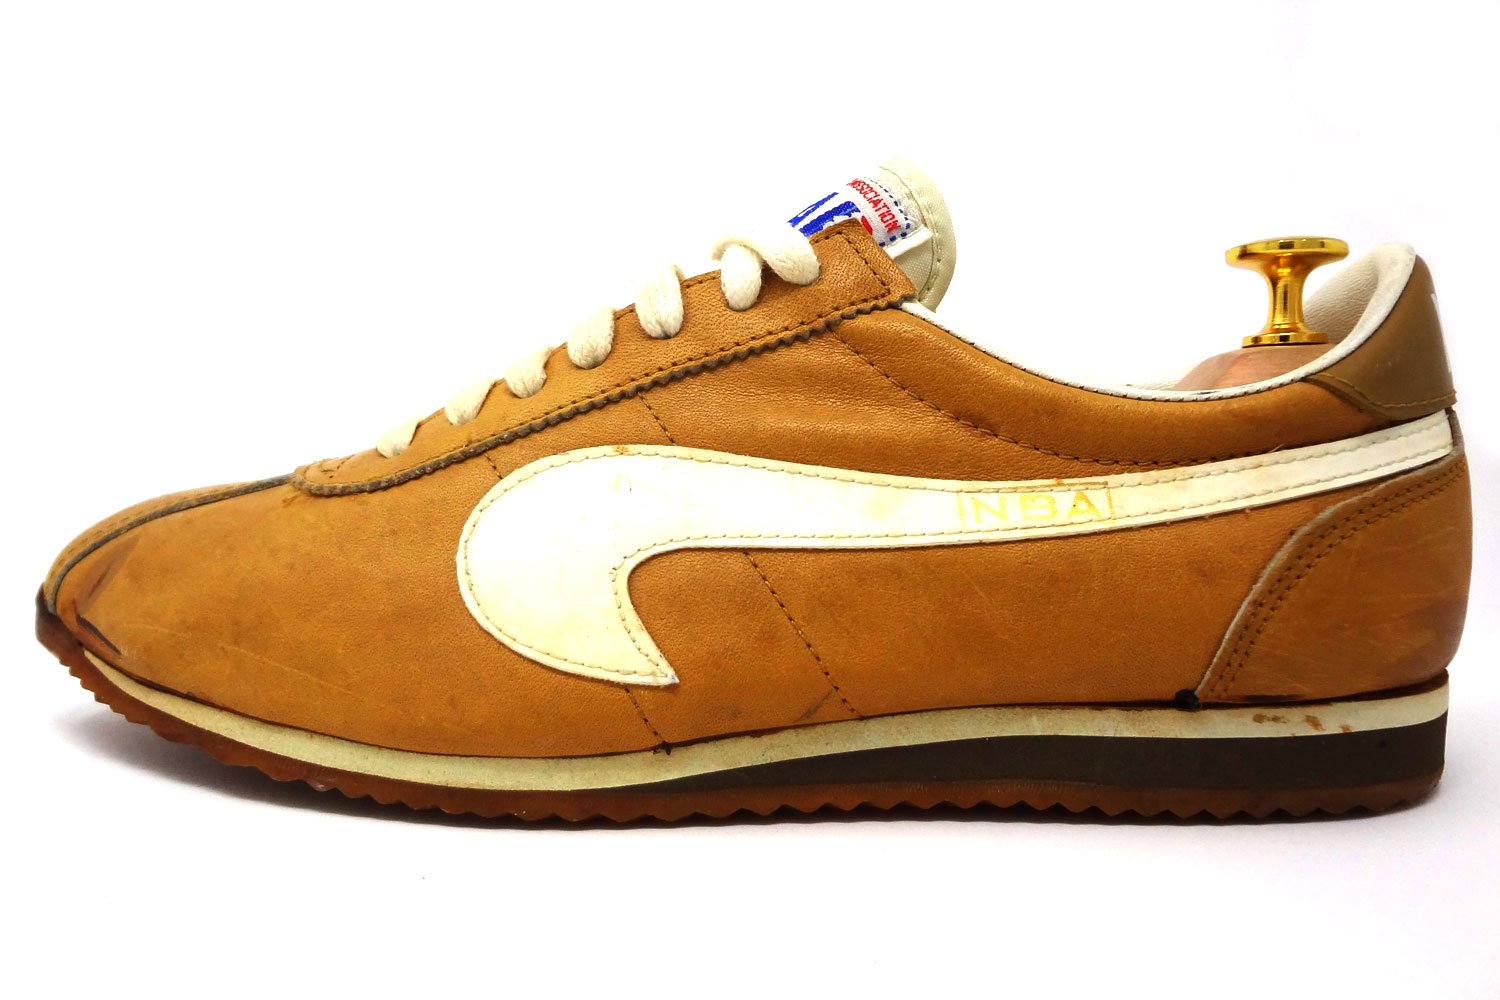 The Deffest®. A vintage and retro sneaker blog. — Foot Locker 1980